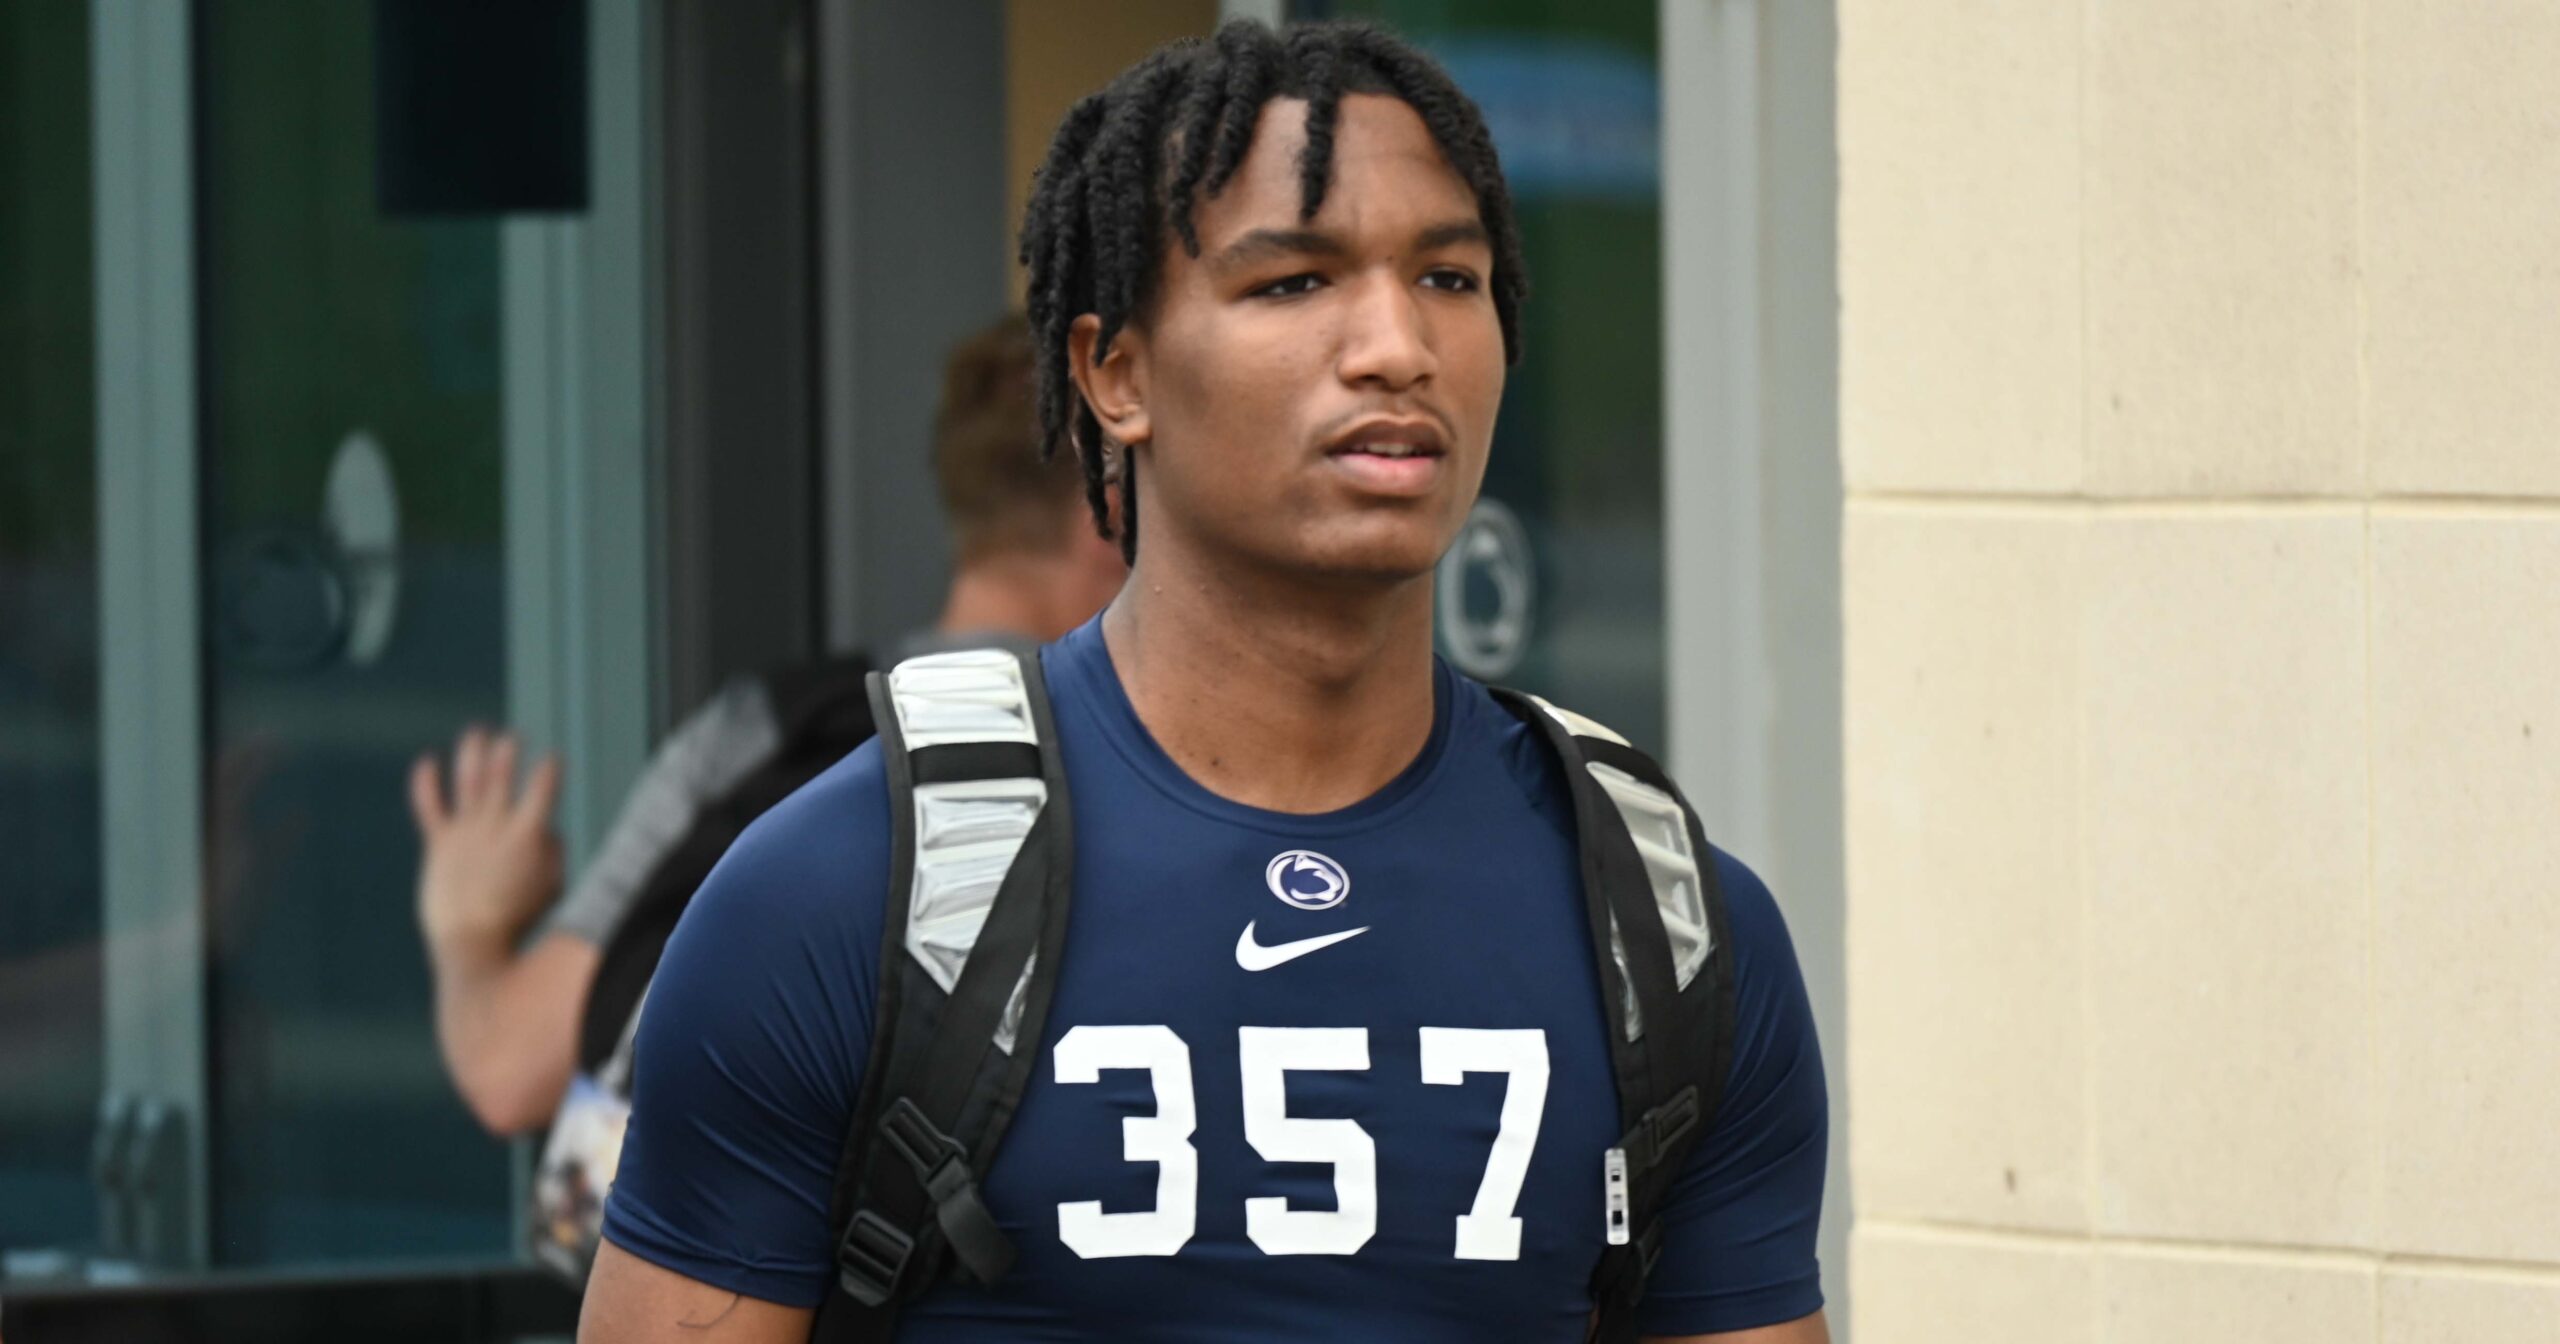 Penn State wide receiver recruit Jaylan Hornsby